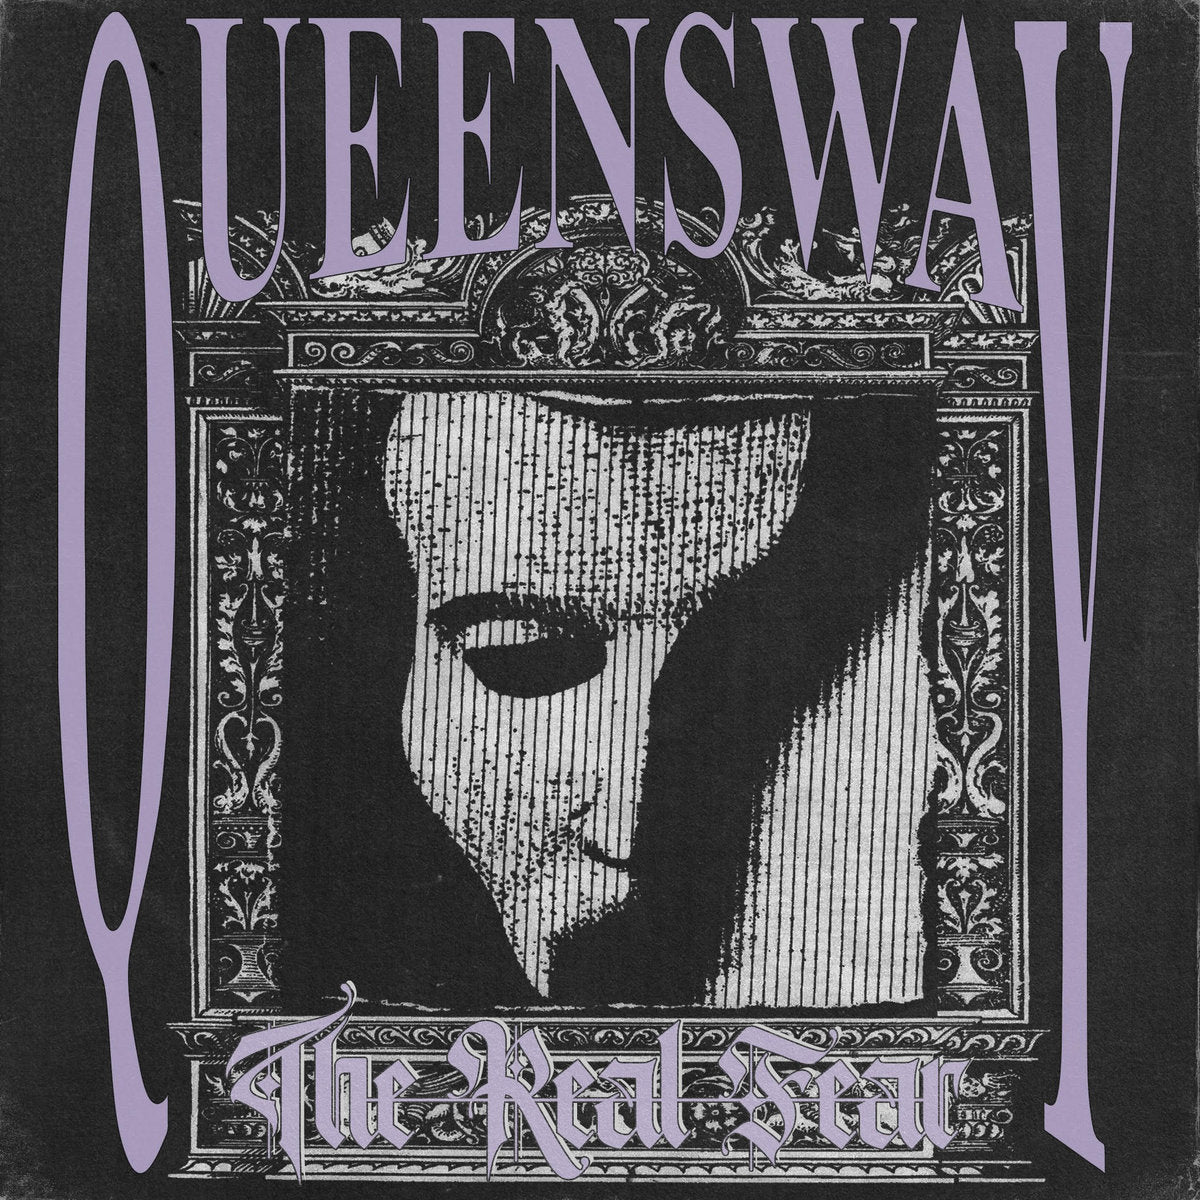 QUEENSWAY "The Real Fear" 12"